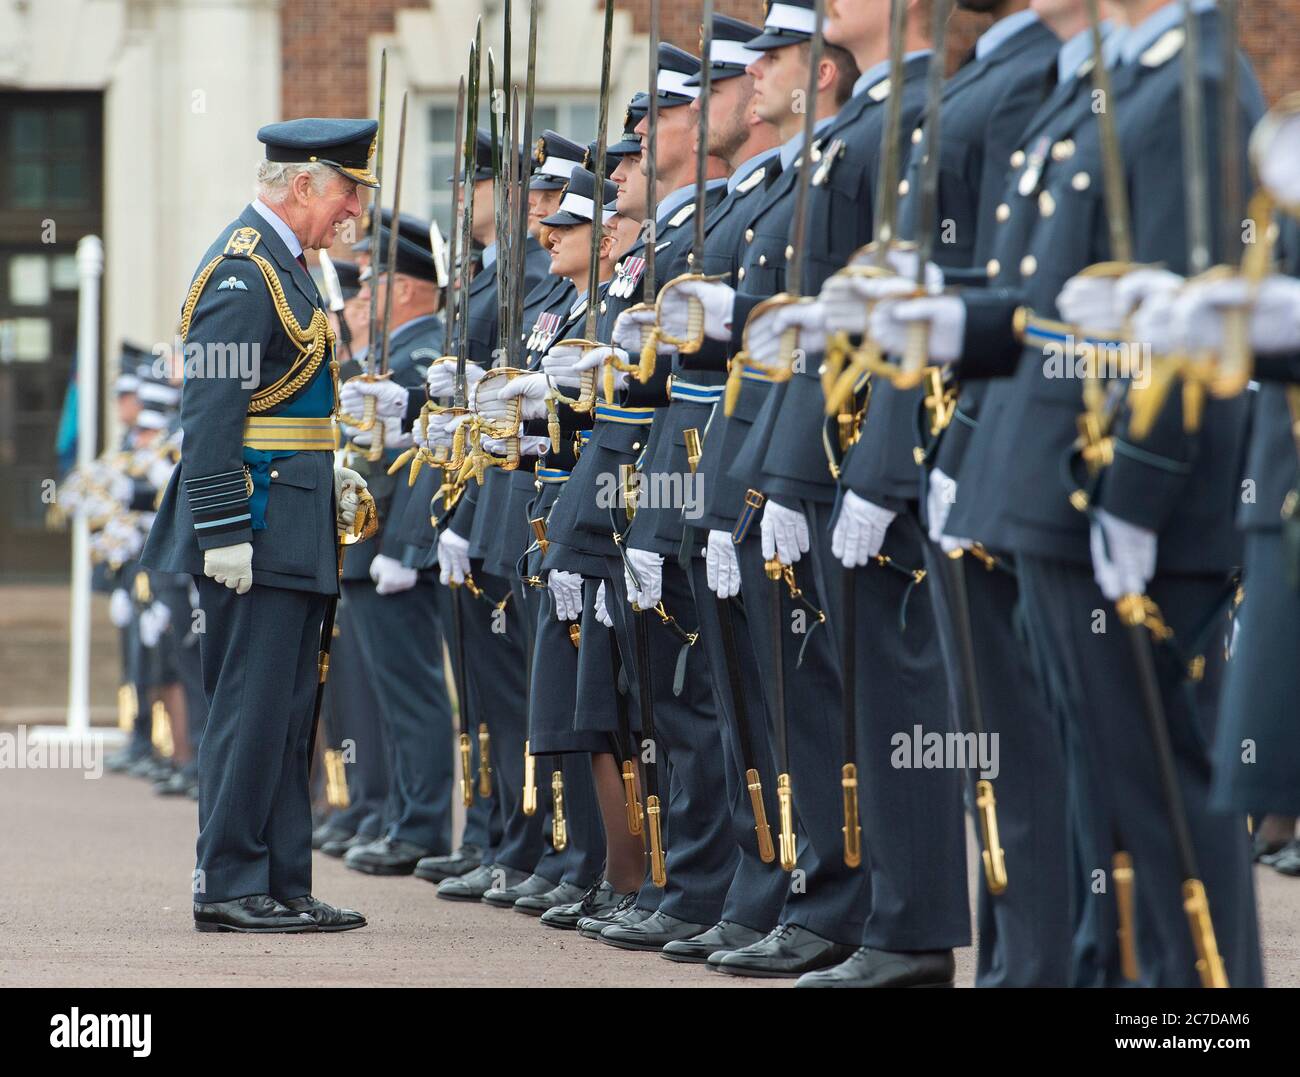 The Prince of Wales inspects the graduates during the Graduation Ceremony of the Queen's Squadron at RAF College Cranwell, Lincolnshire. Stock Photo